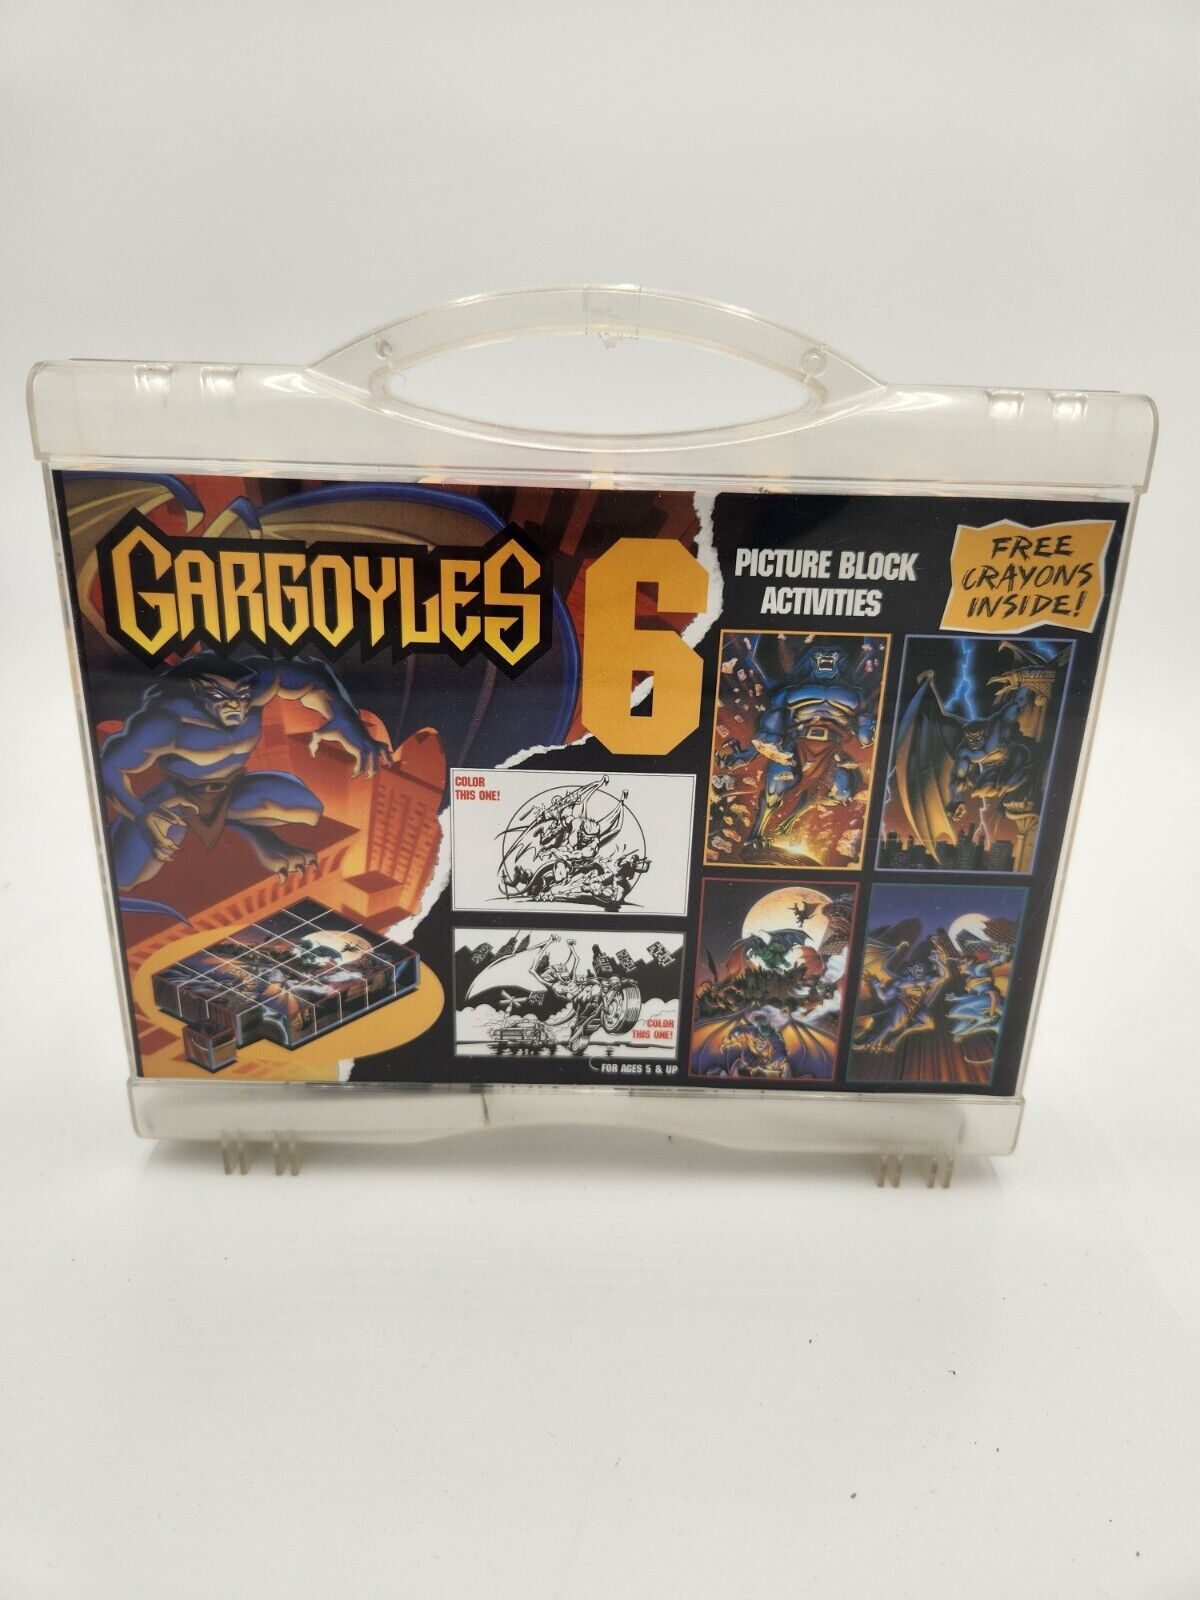 New Sealed 1995 Gargoyles RoseArt Activity Case Picture Block Activities, Color